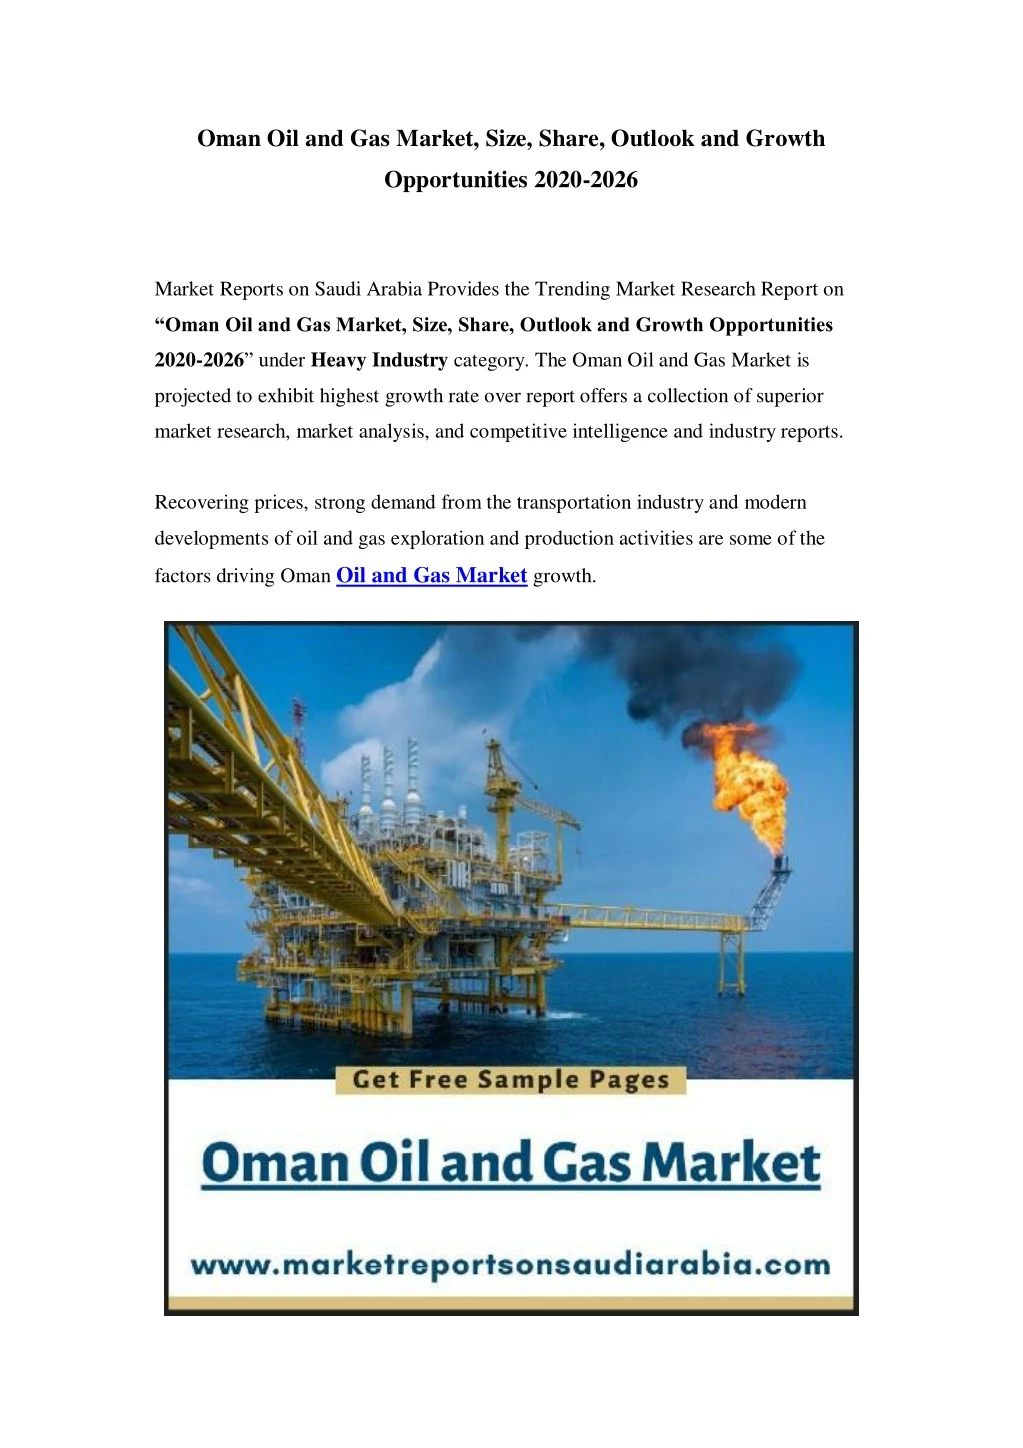 oman oil and gas market size share outlook